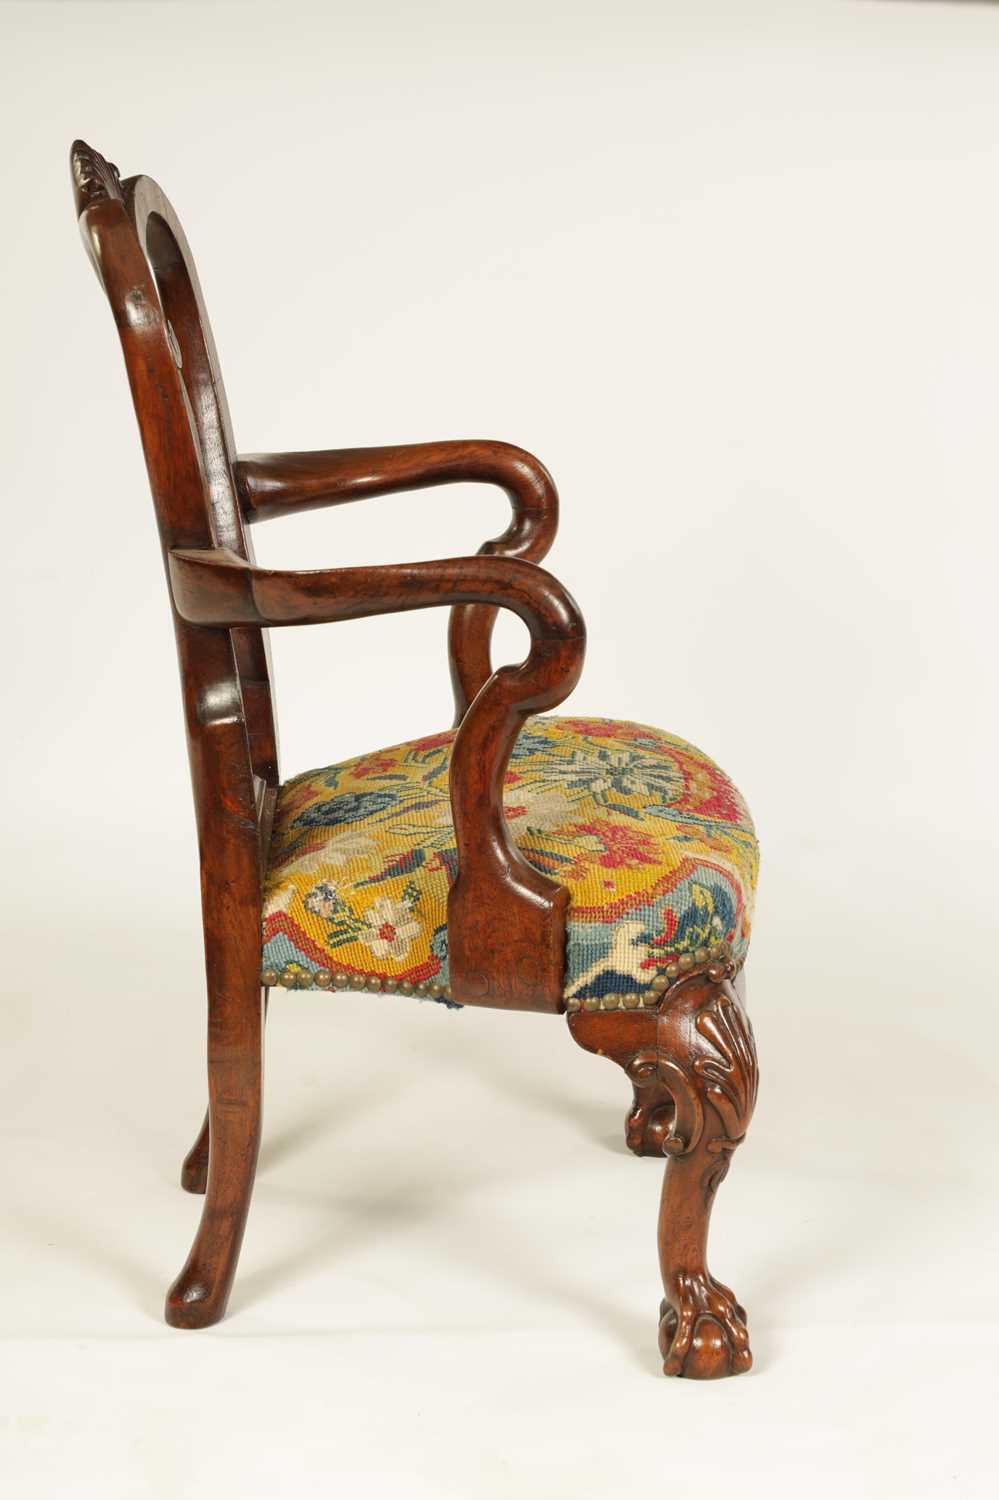 A 19TH CENTURY GEORGE I STYLE BURR WALNUT CHILD'S CHAIR - Image 8 of 9